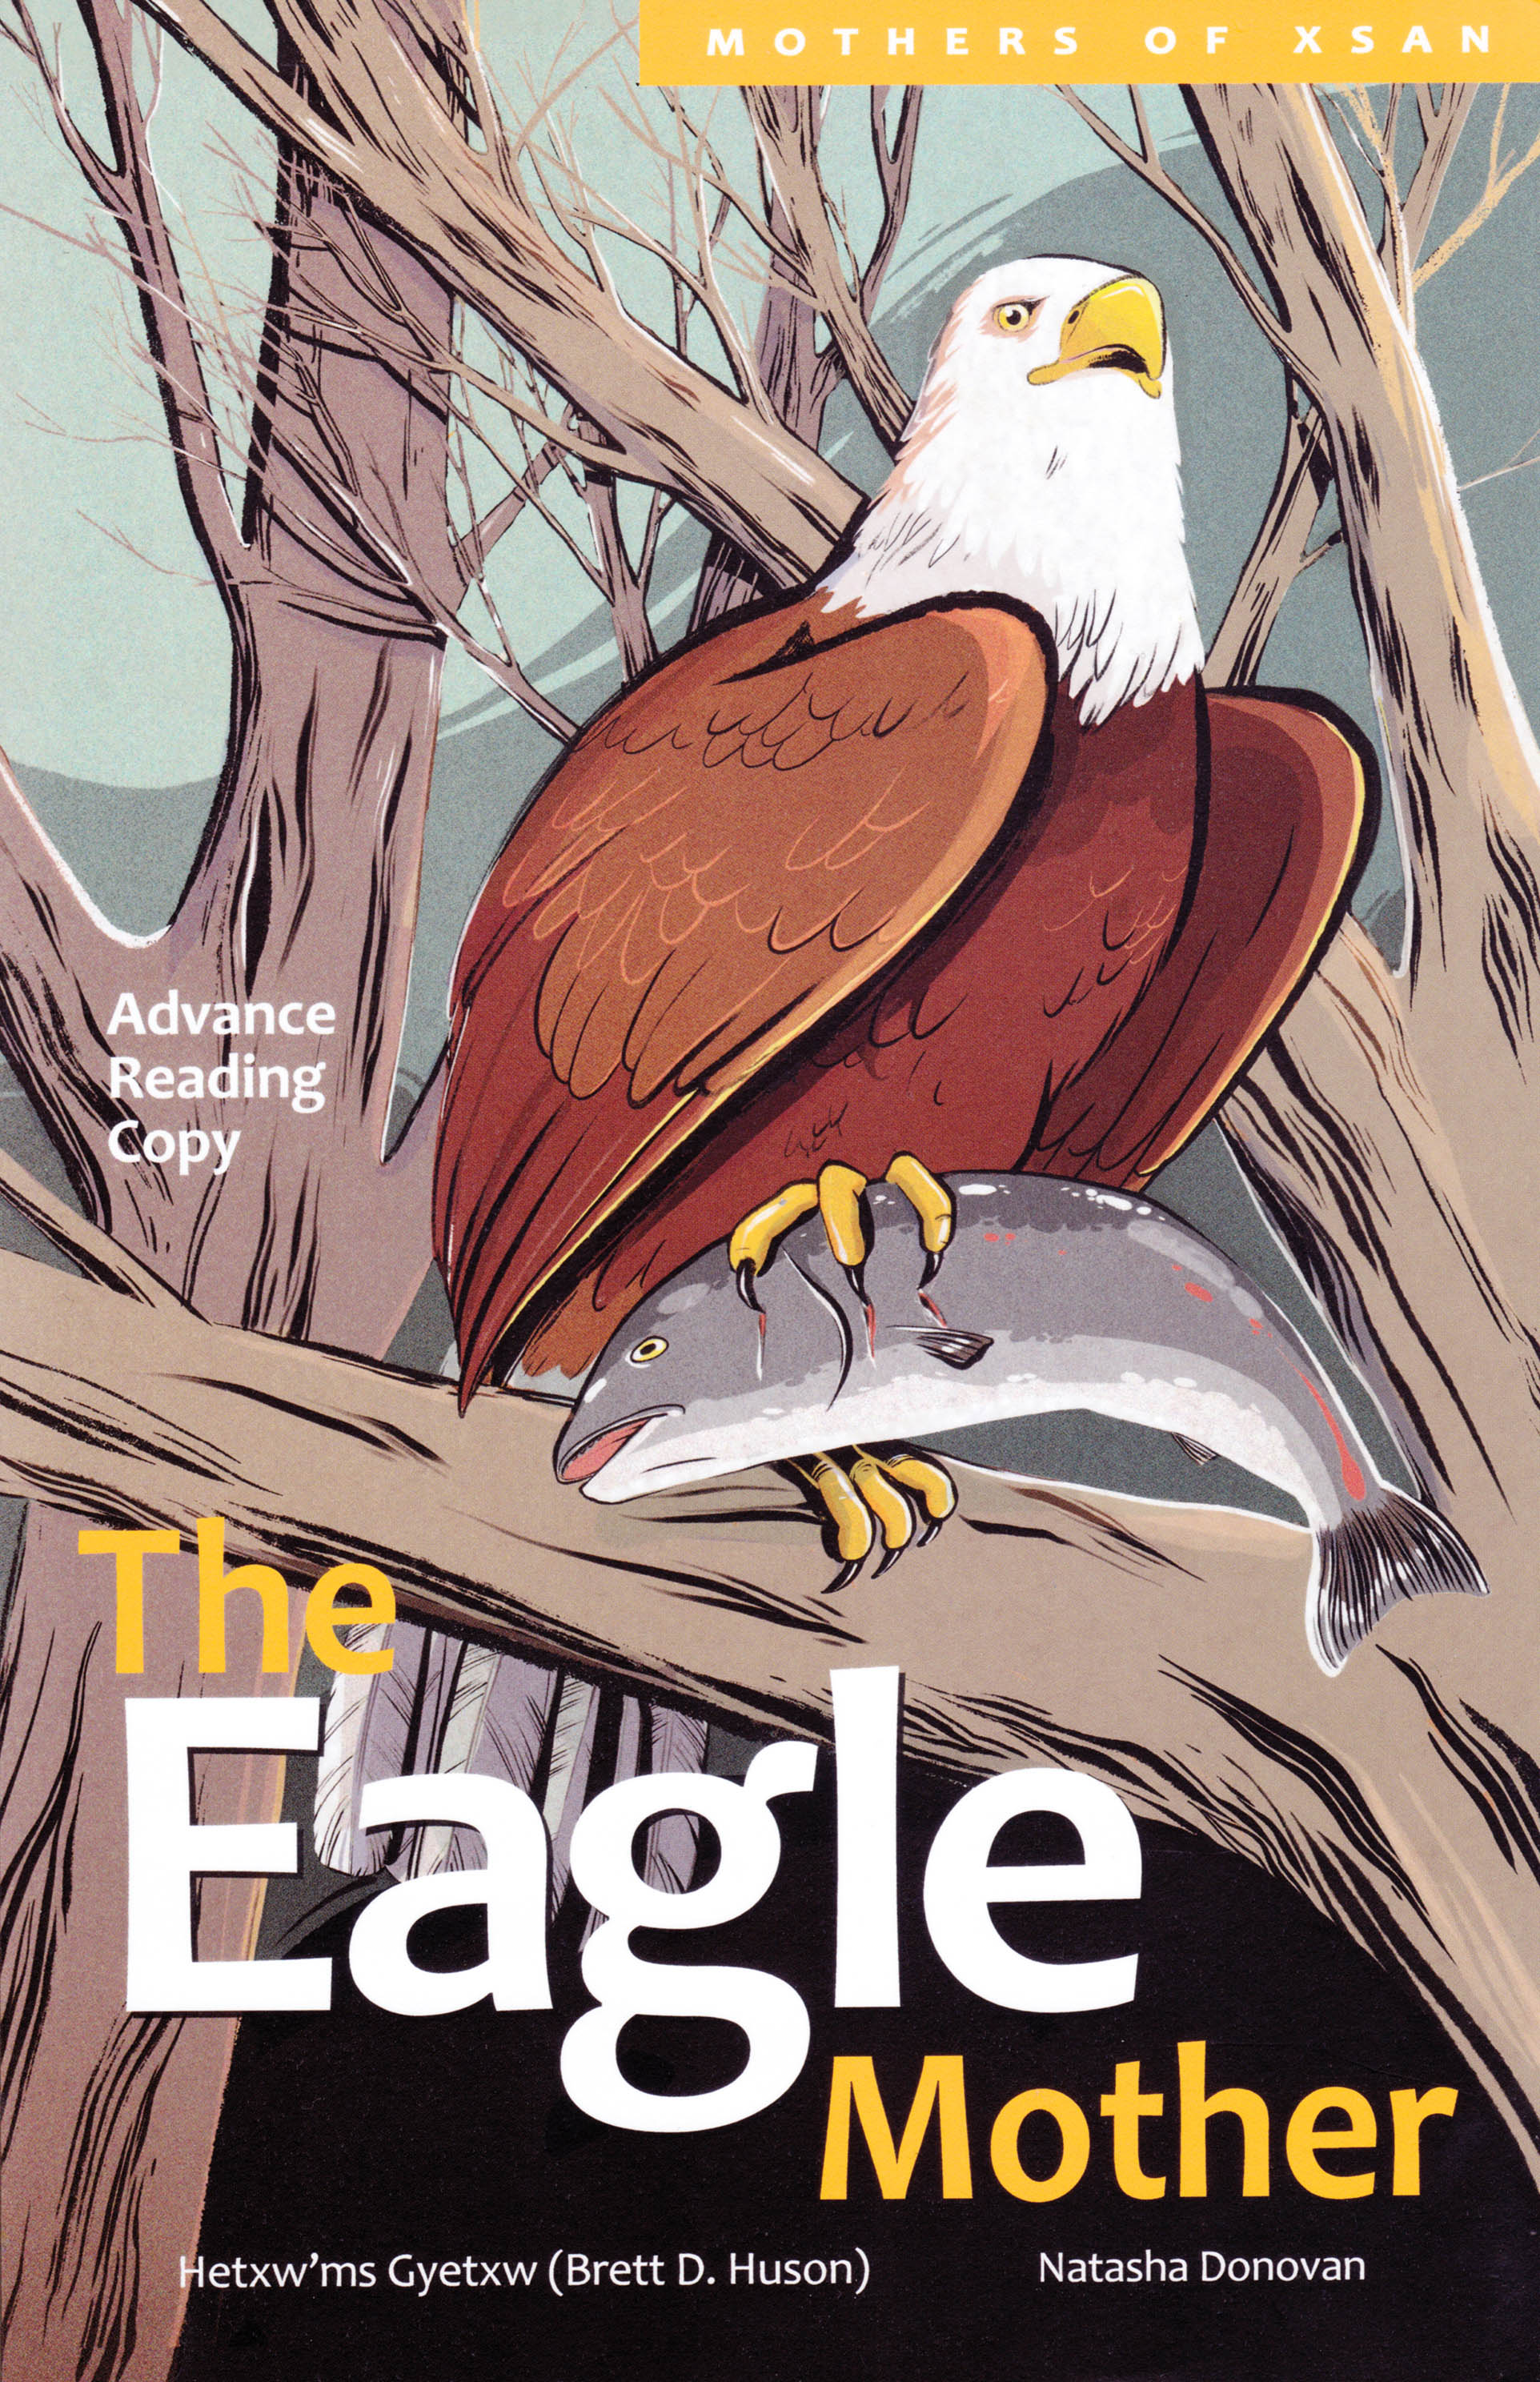 'The Eagle Mother' book cover